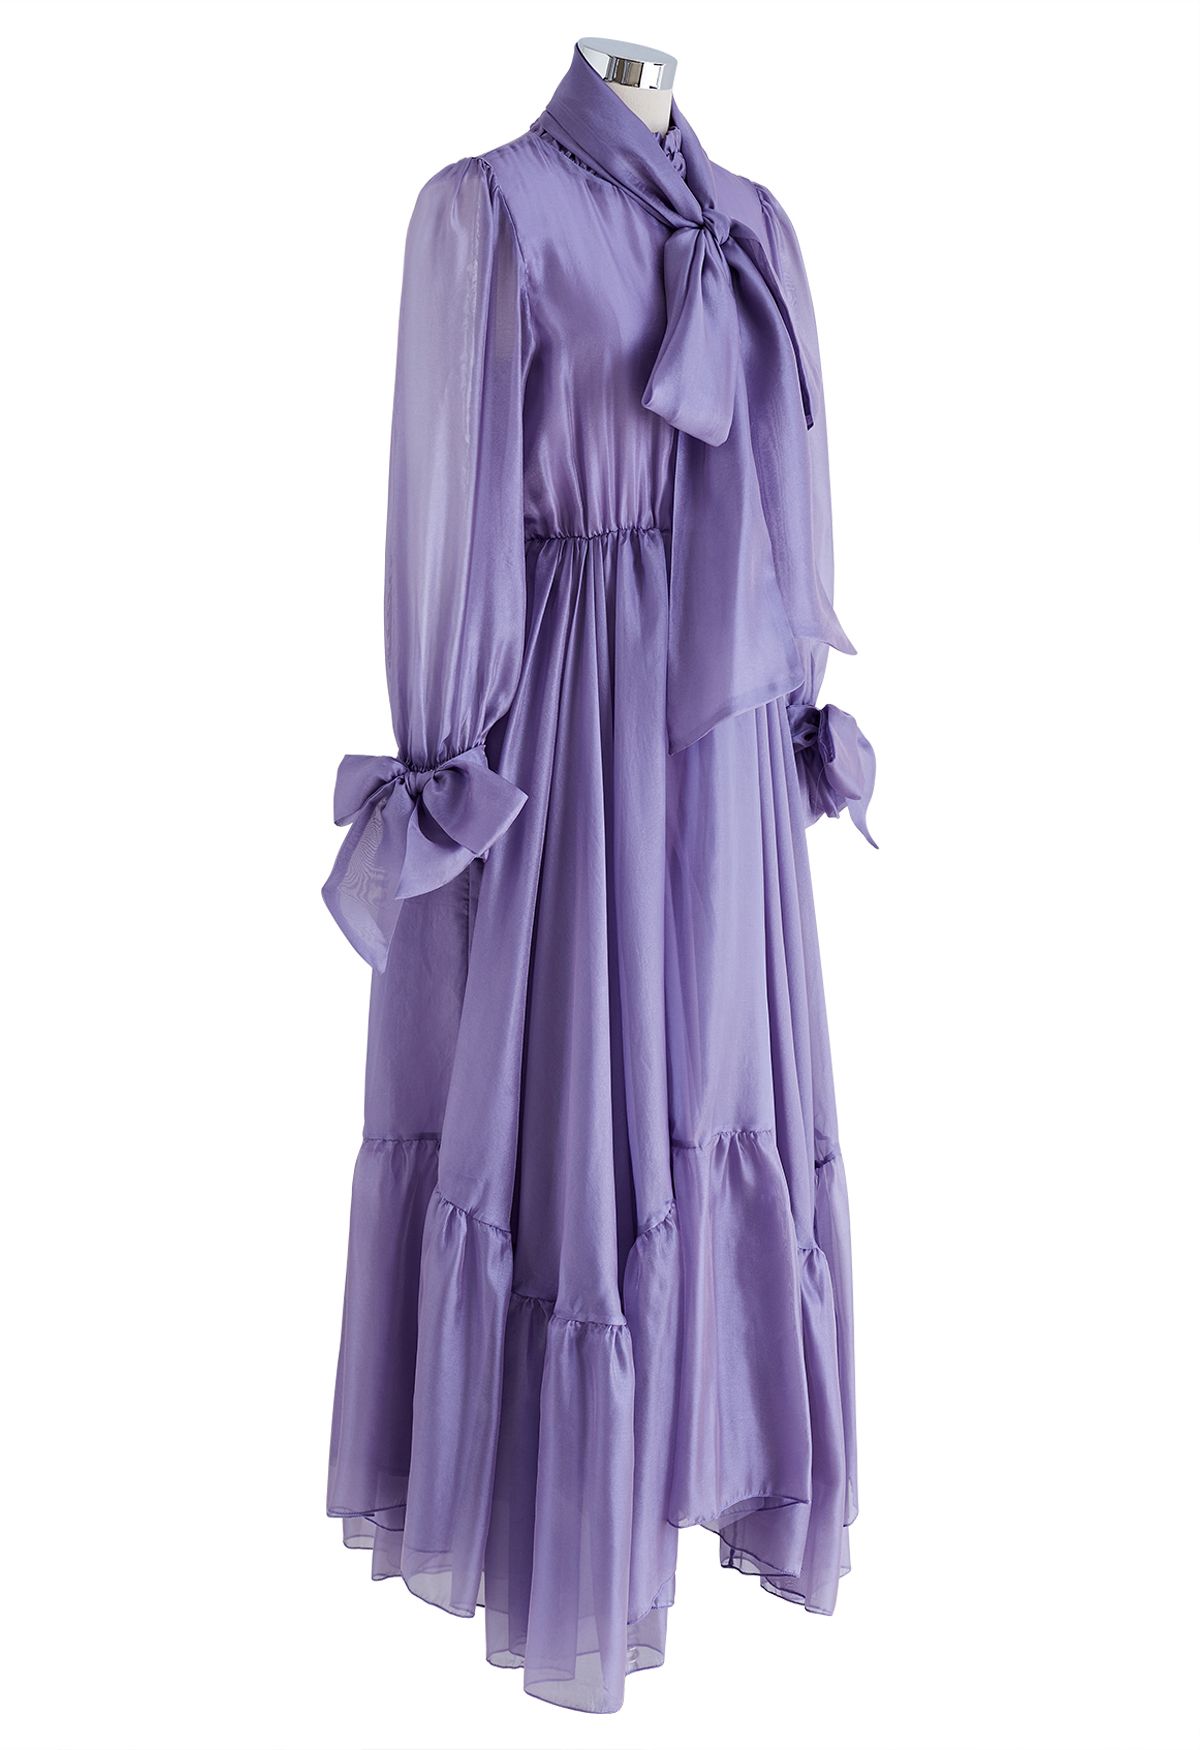 Gorgeous Bow Neck Sheer Mesh Frilling Dress in Lilac